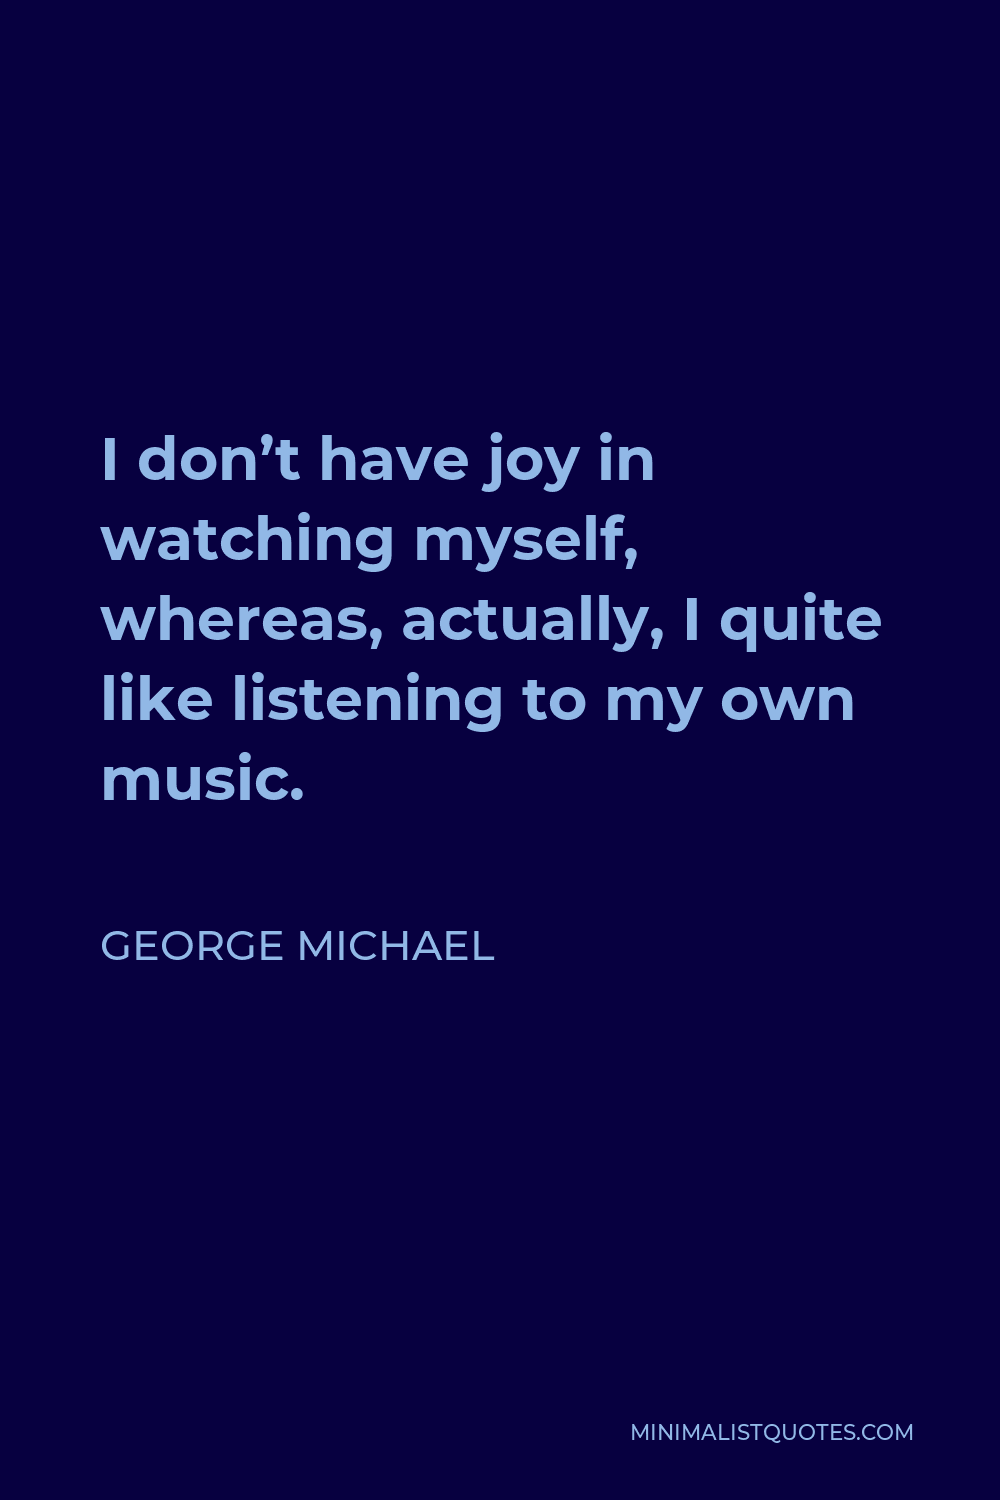 George Michael Quote - I don’t have joy in watching myself, whereas, actually, I quite like listening to my own music.